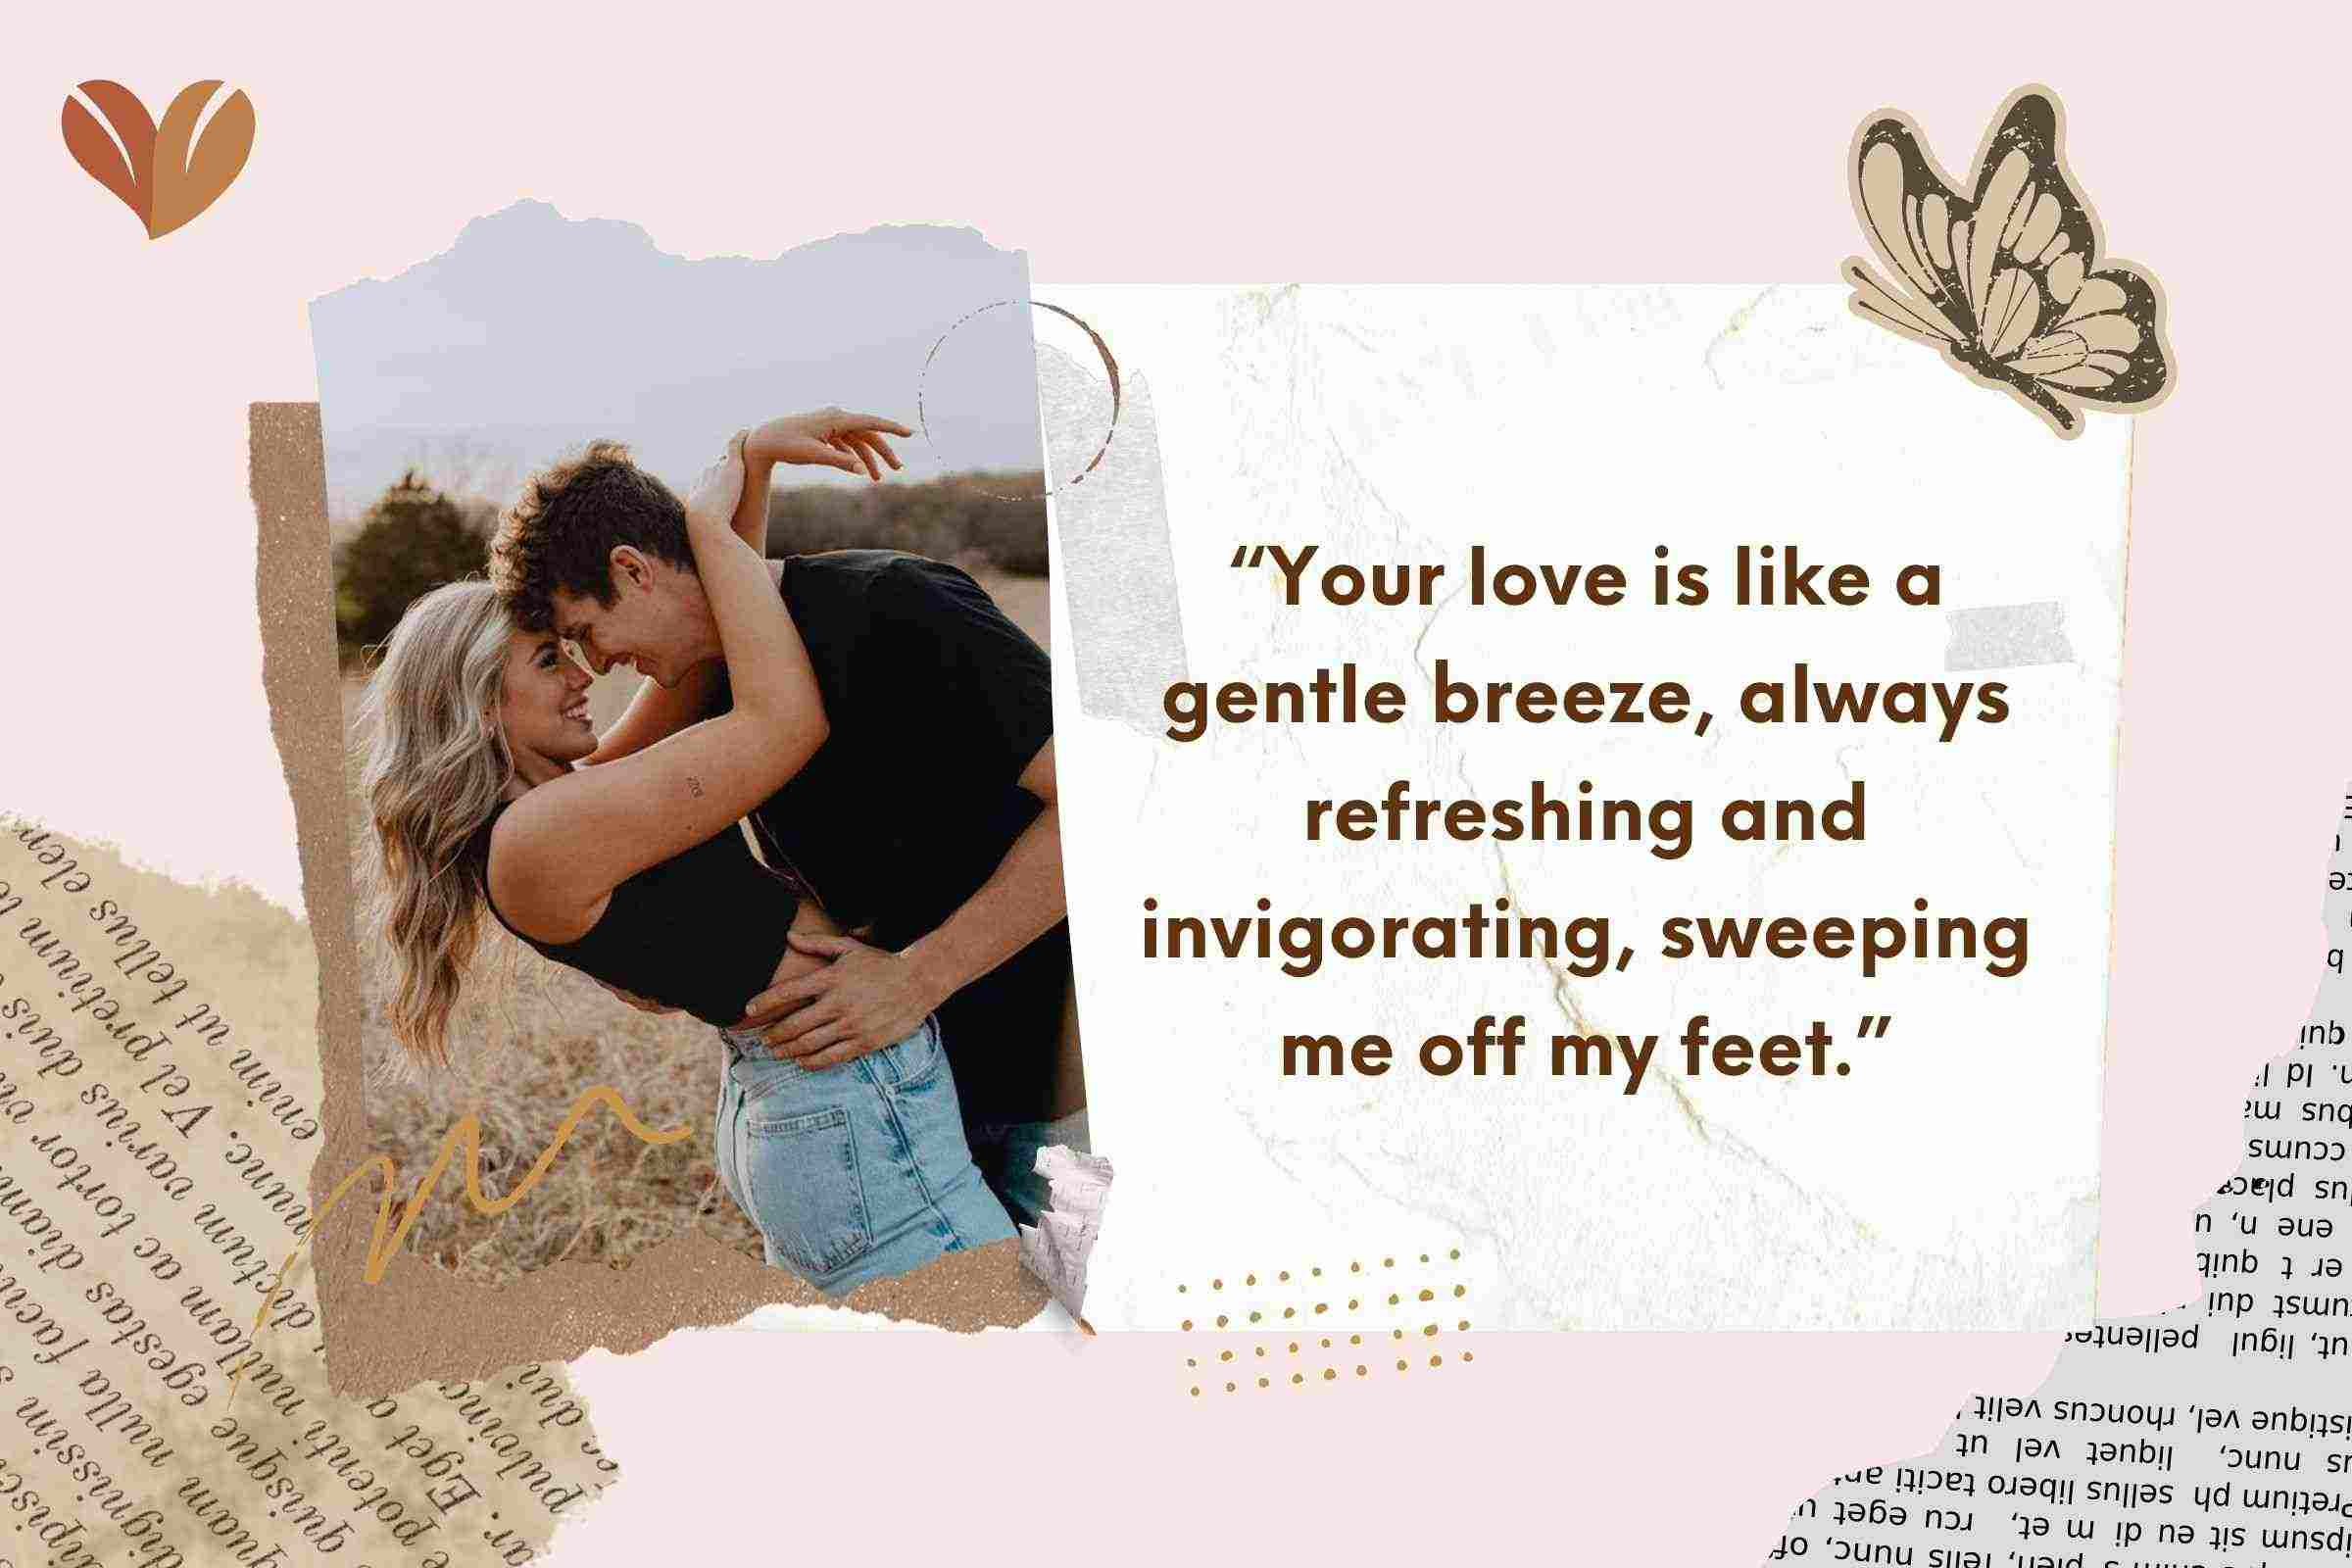 “Your love is like a gentle breeze, always refreshing and invigorating, sweeping me off my feet.”